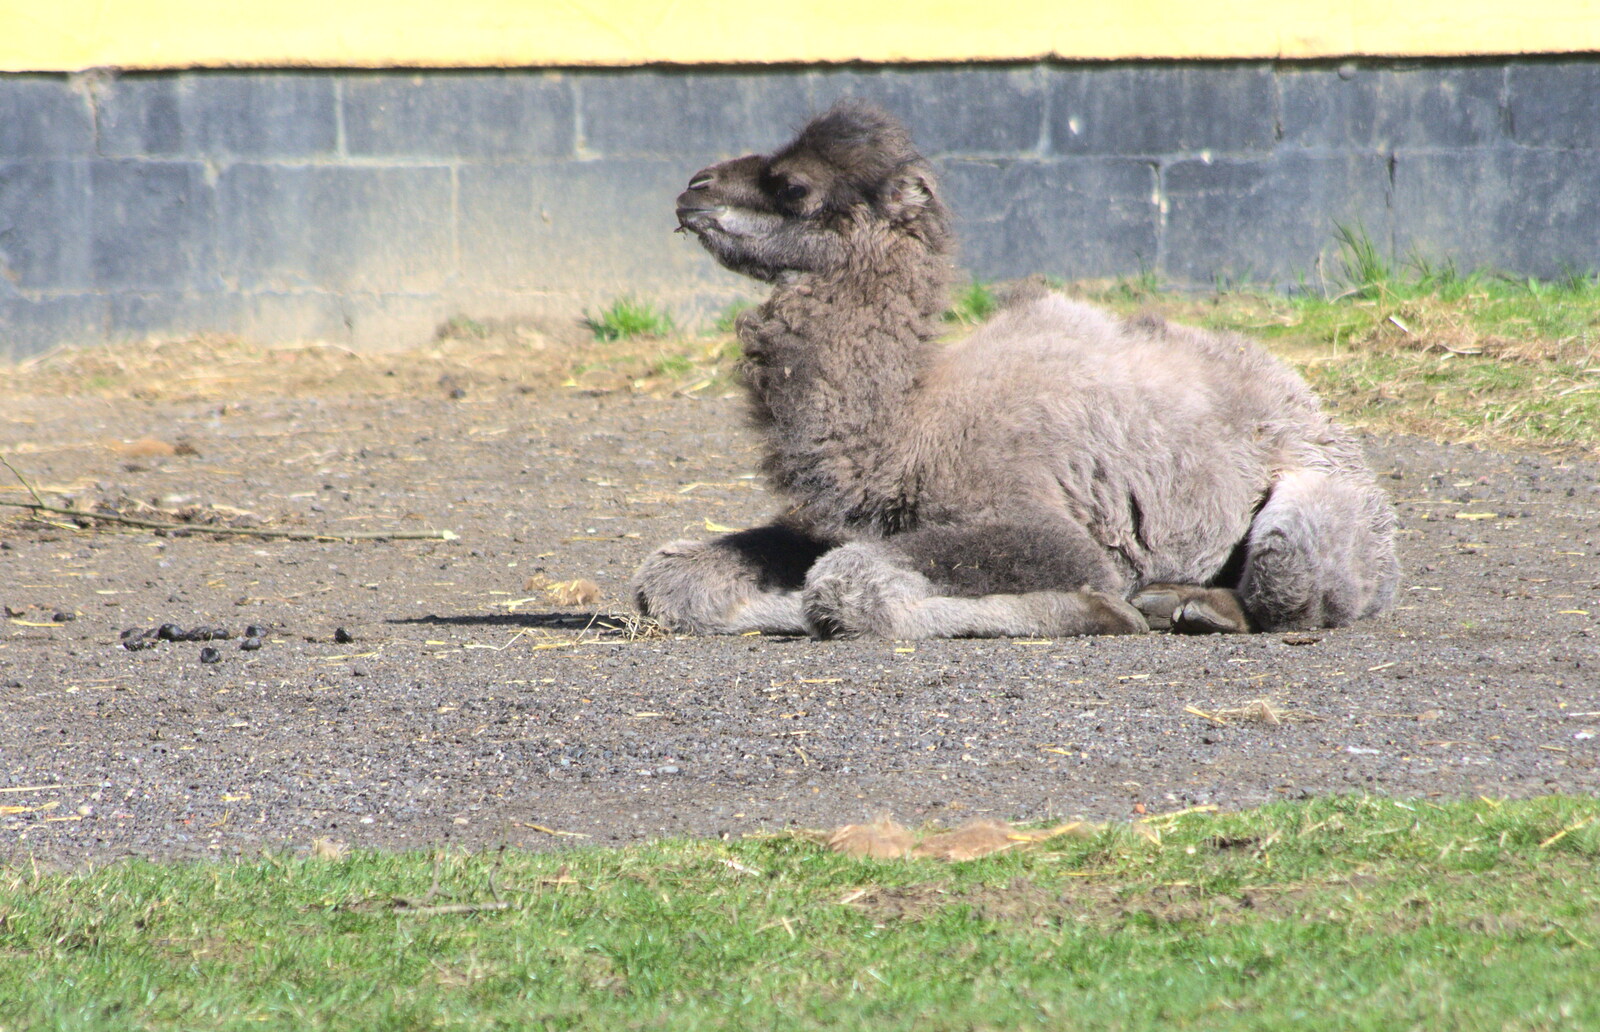 Banham Zoo has a baby Bactrian camel from Another Trip to Banham Zoo, Banham, Norfolk - 25th March 2016